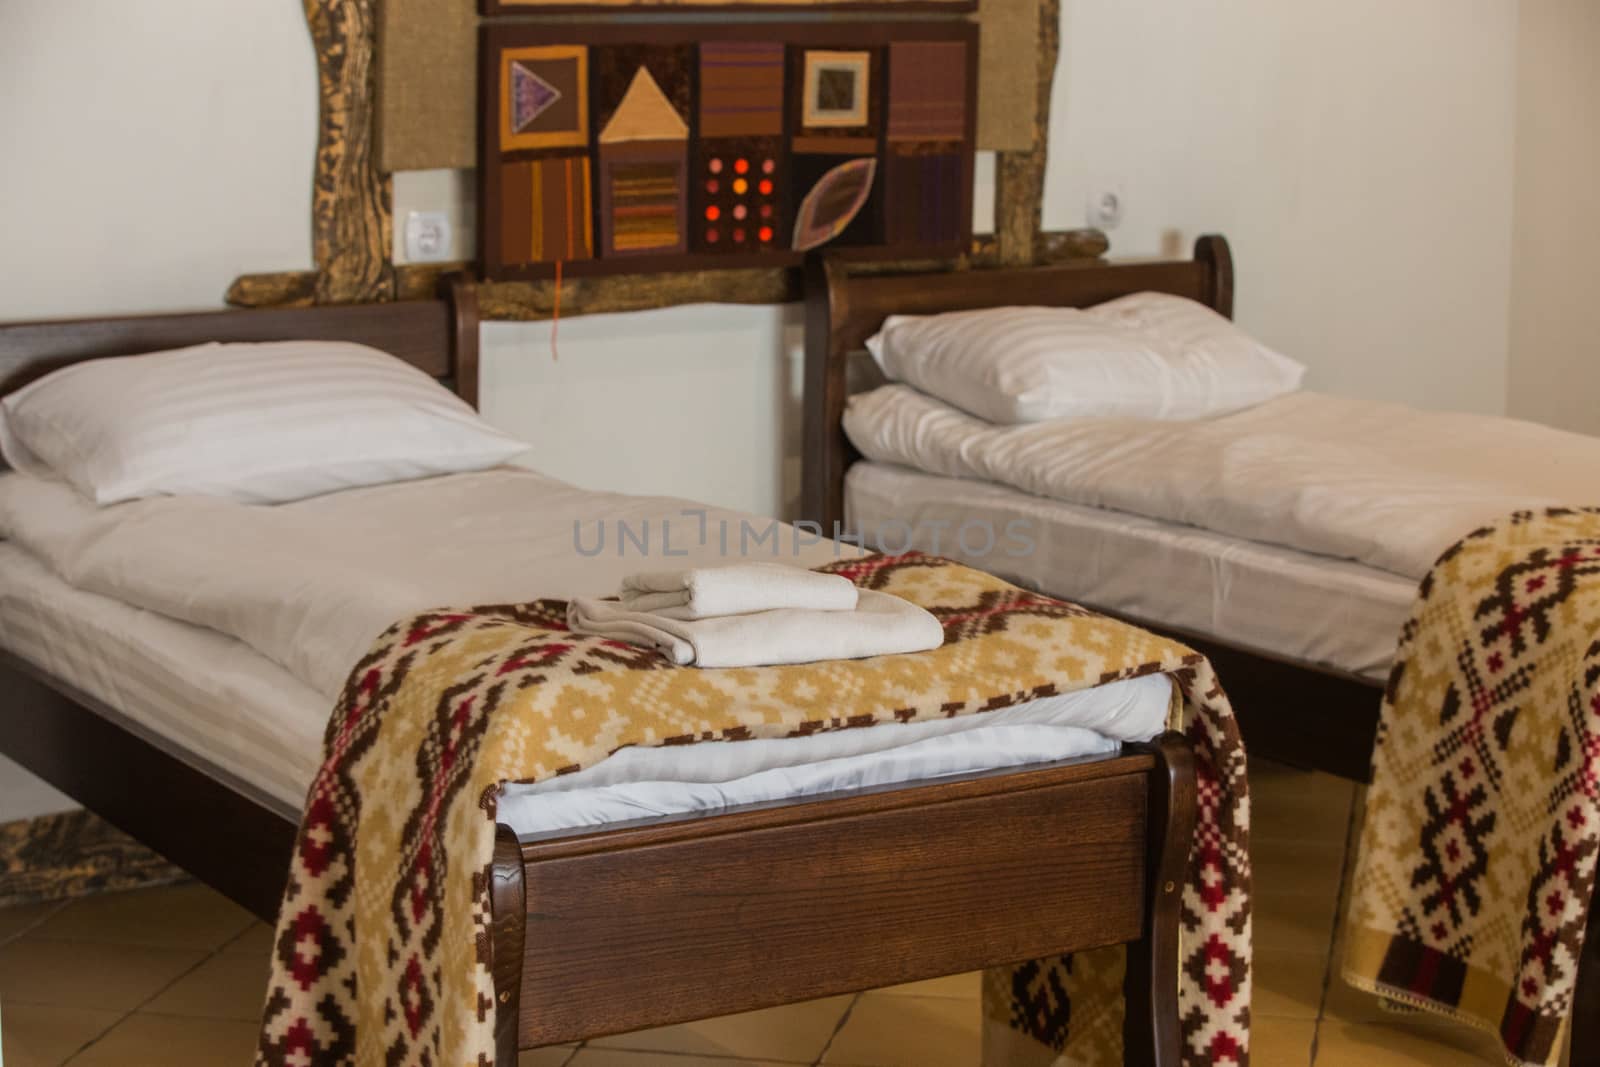 Wooden Bed of a Modern Hotel Room. Exquisite Interior in a Cozy Place. by TrEKone